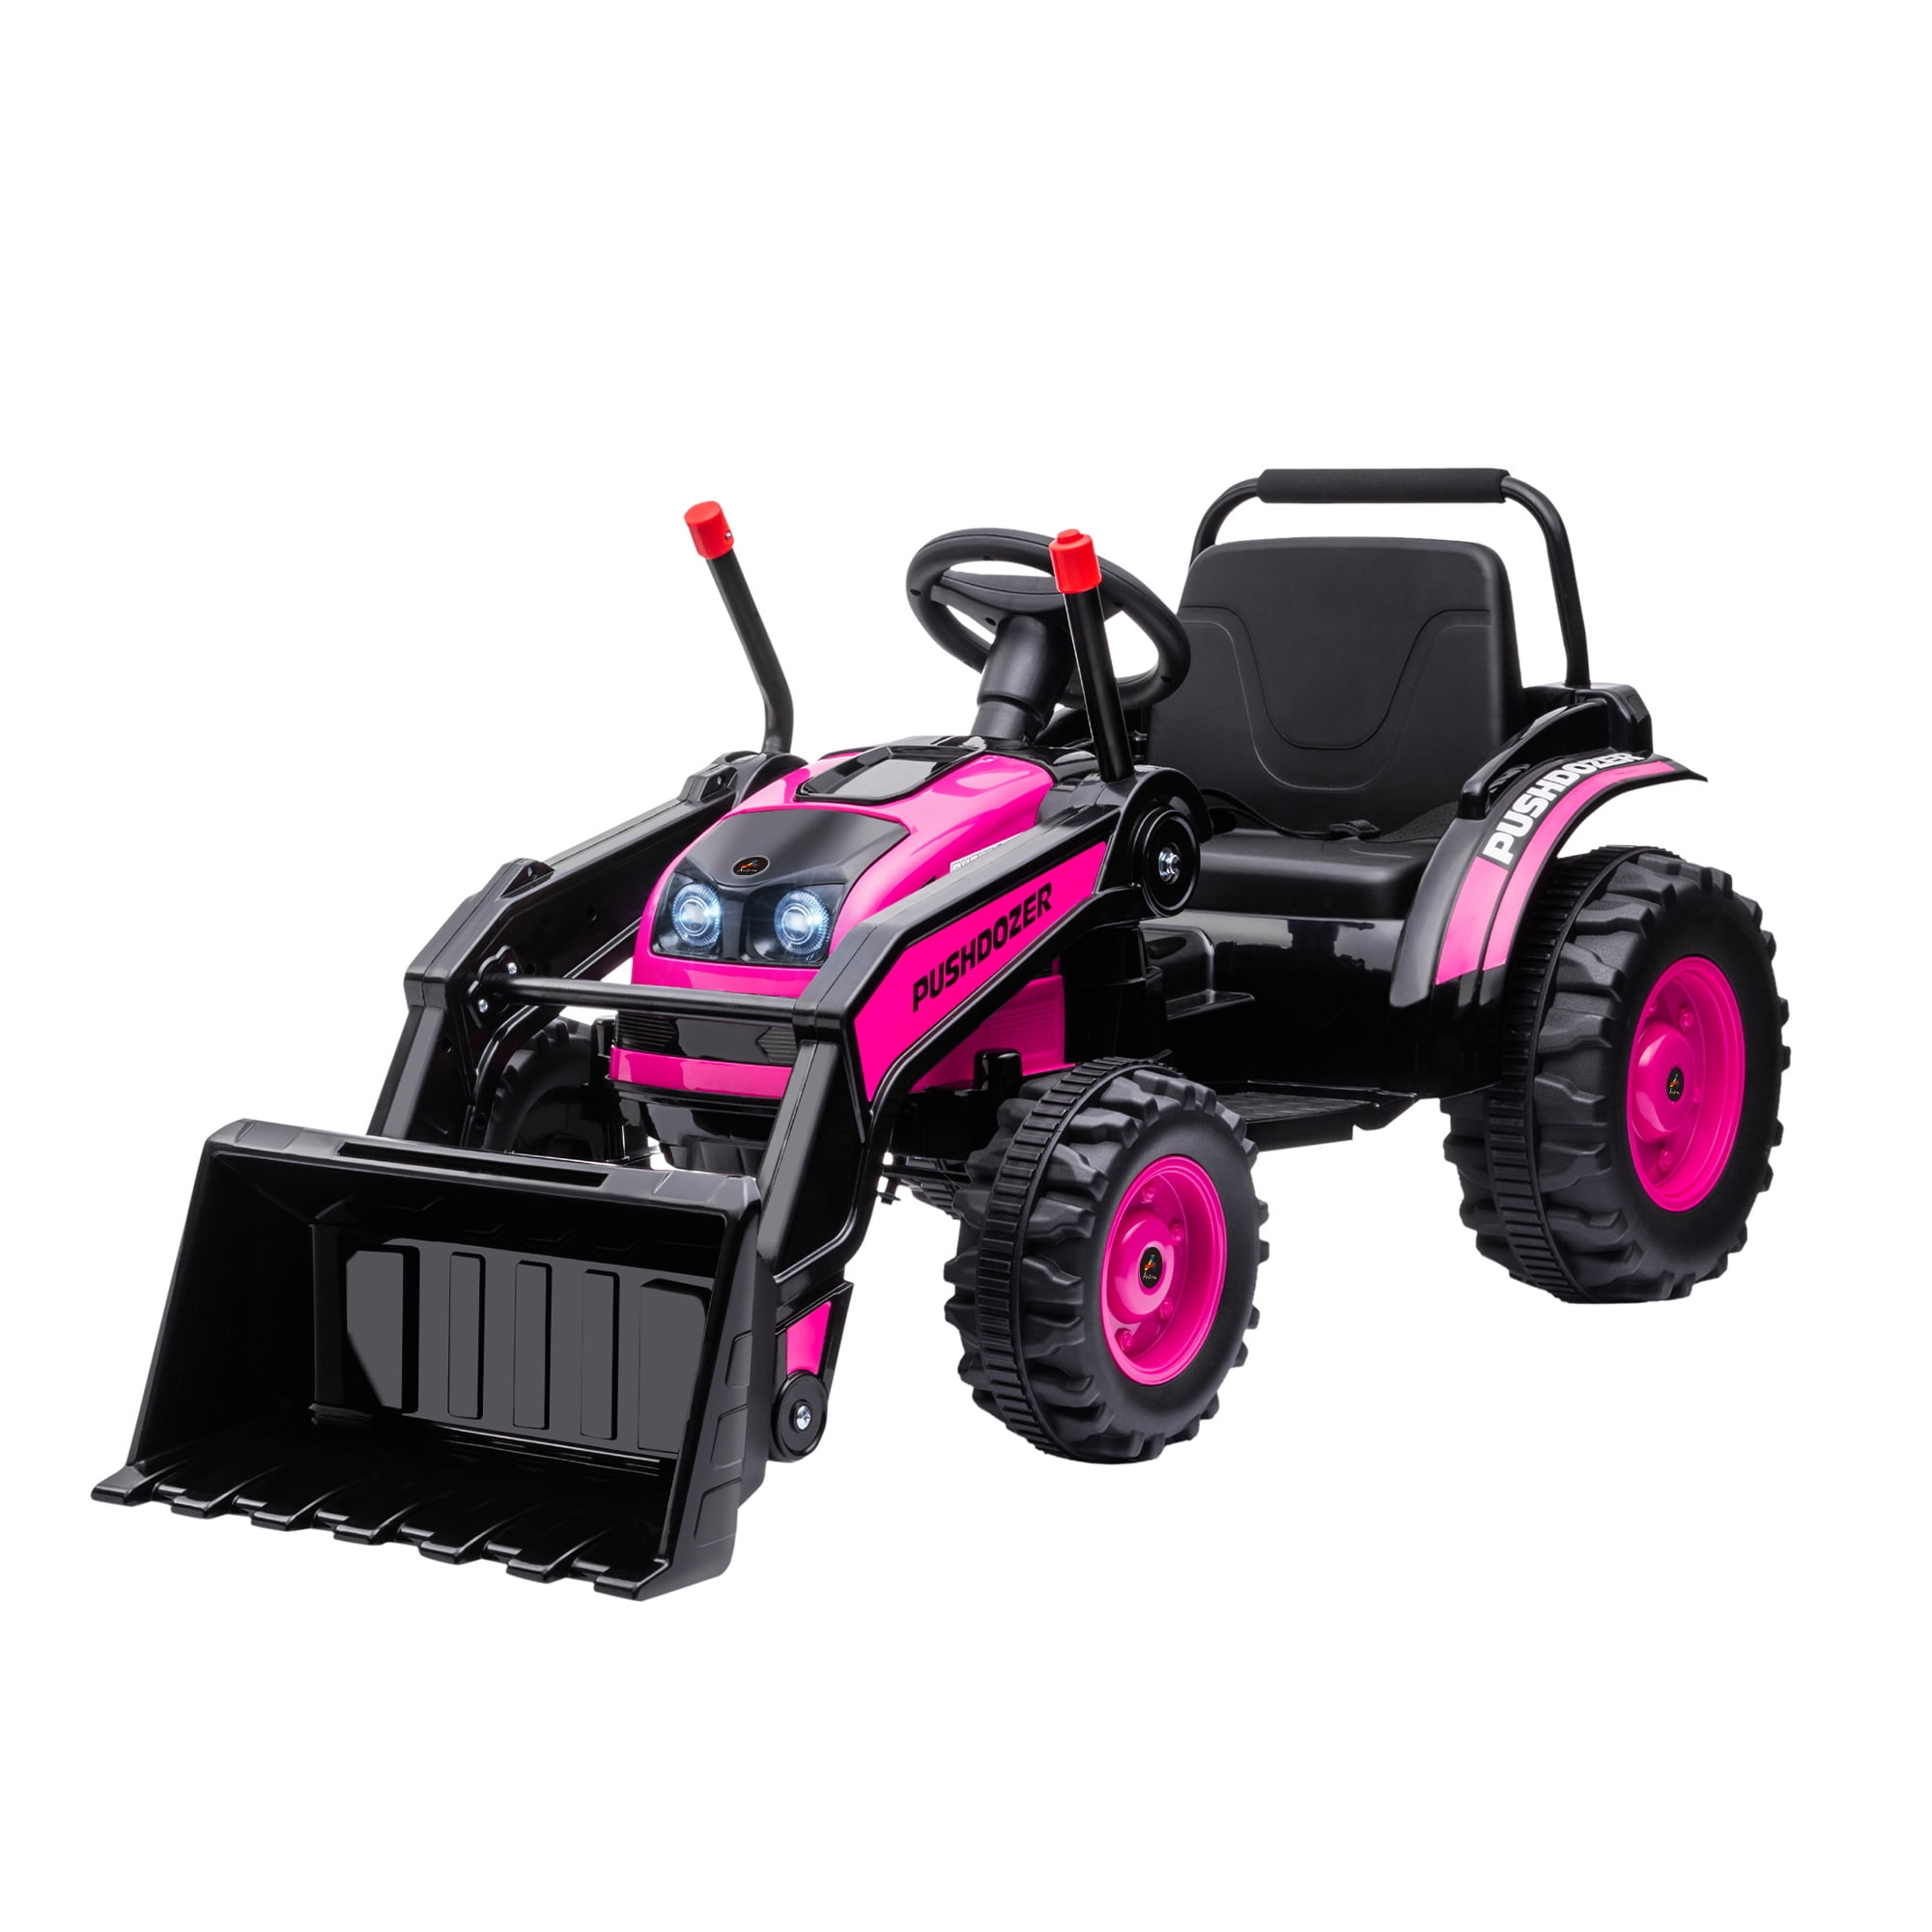 Aosom Kids Digger Ride On Excavator 6V Battery Powered Dual-Motor  Construction Tractor Music Headlight Moving Forward Backward Gear for 3-5 years old Pink